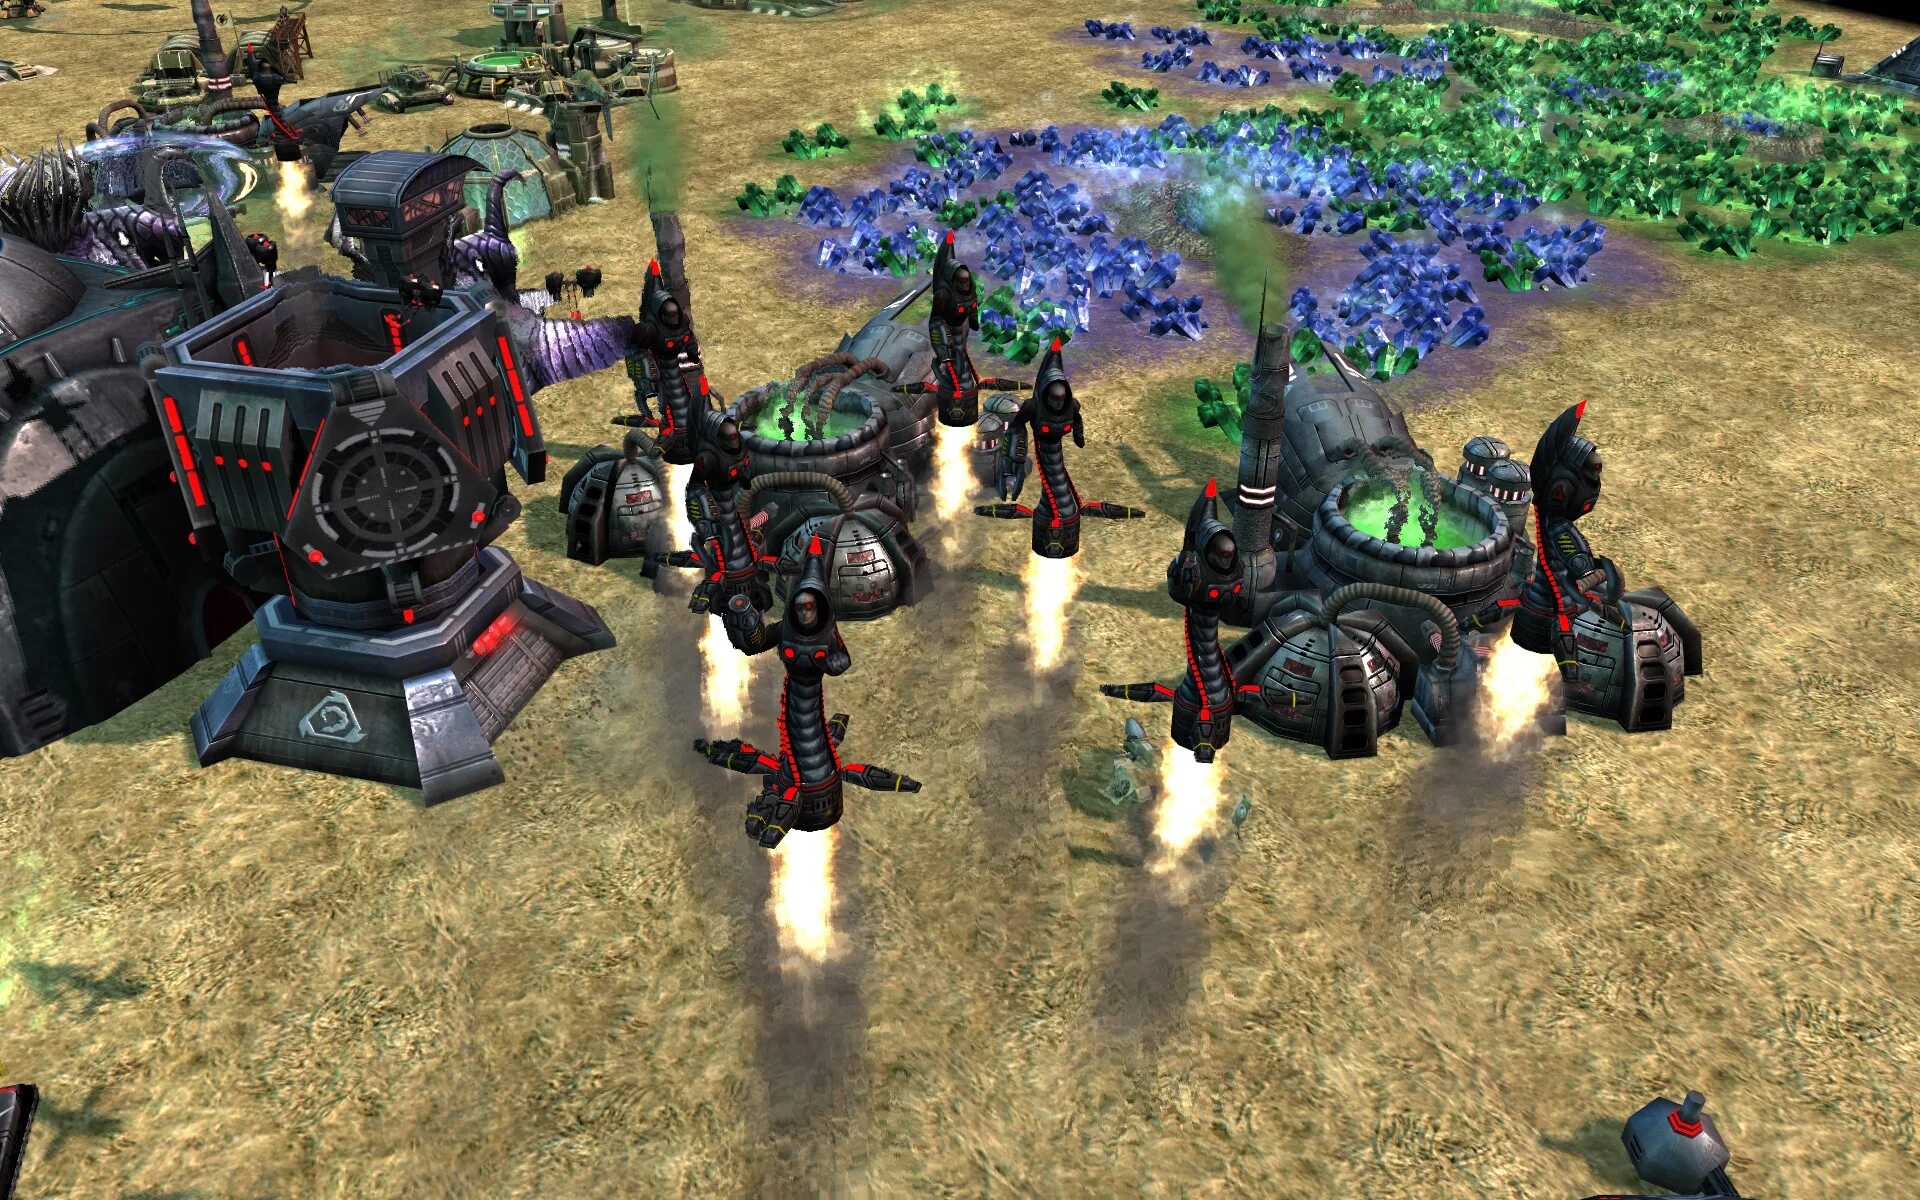 Command & Conquer 3: Kane’s Wrath. Command and Conquer 3 Kane's Wrath Mods. Command Conquer 3 моды. Kane's Wrath моды.